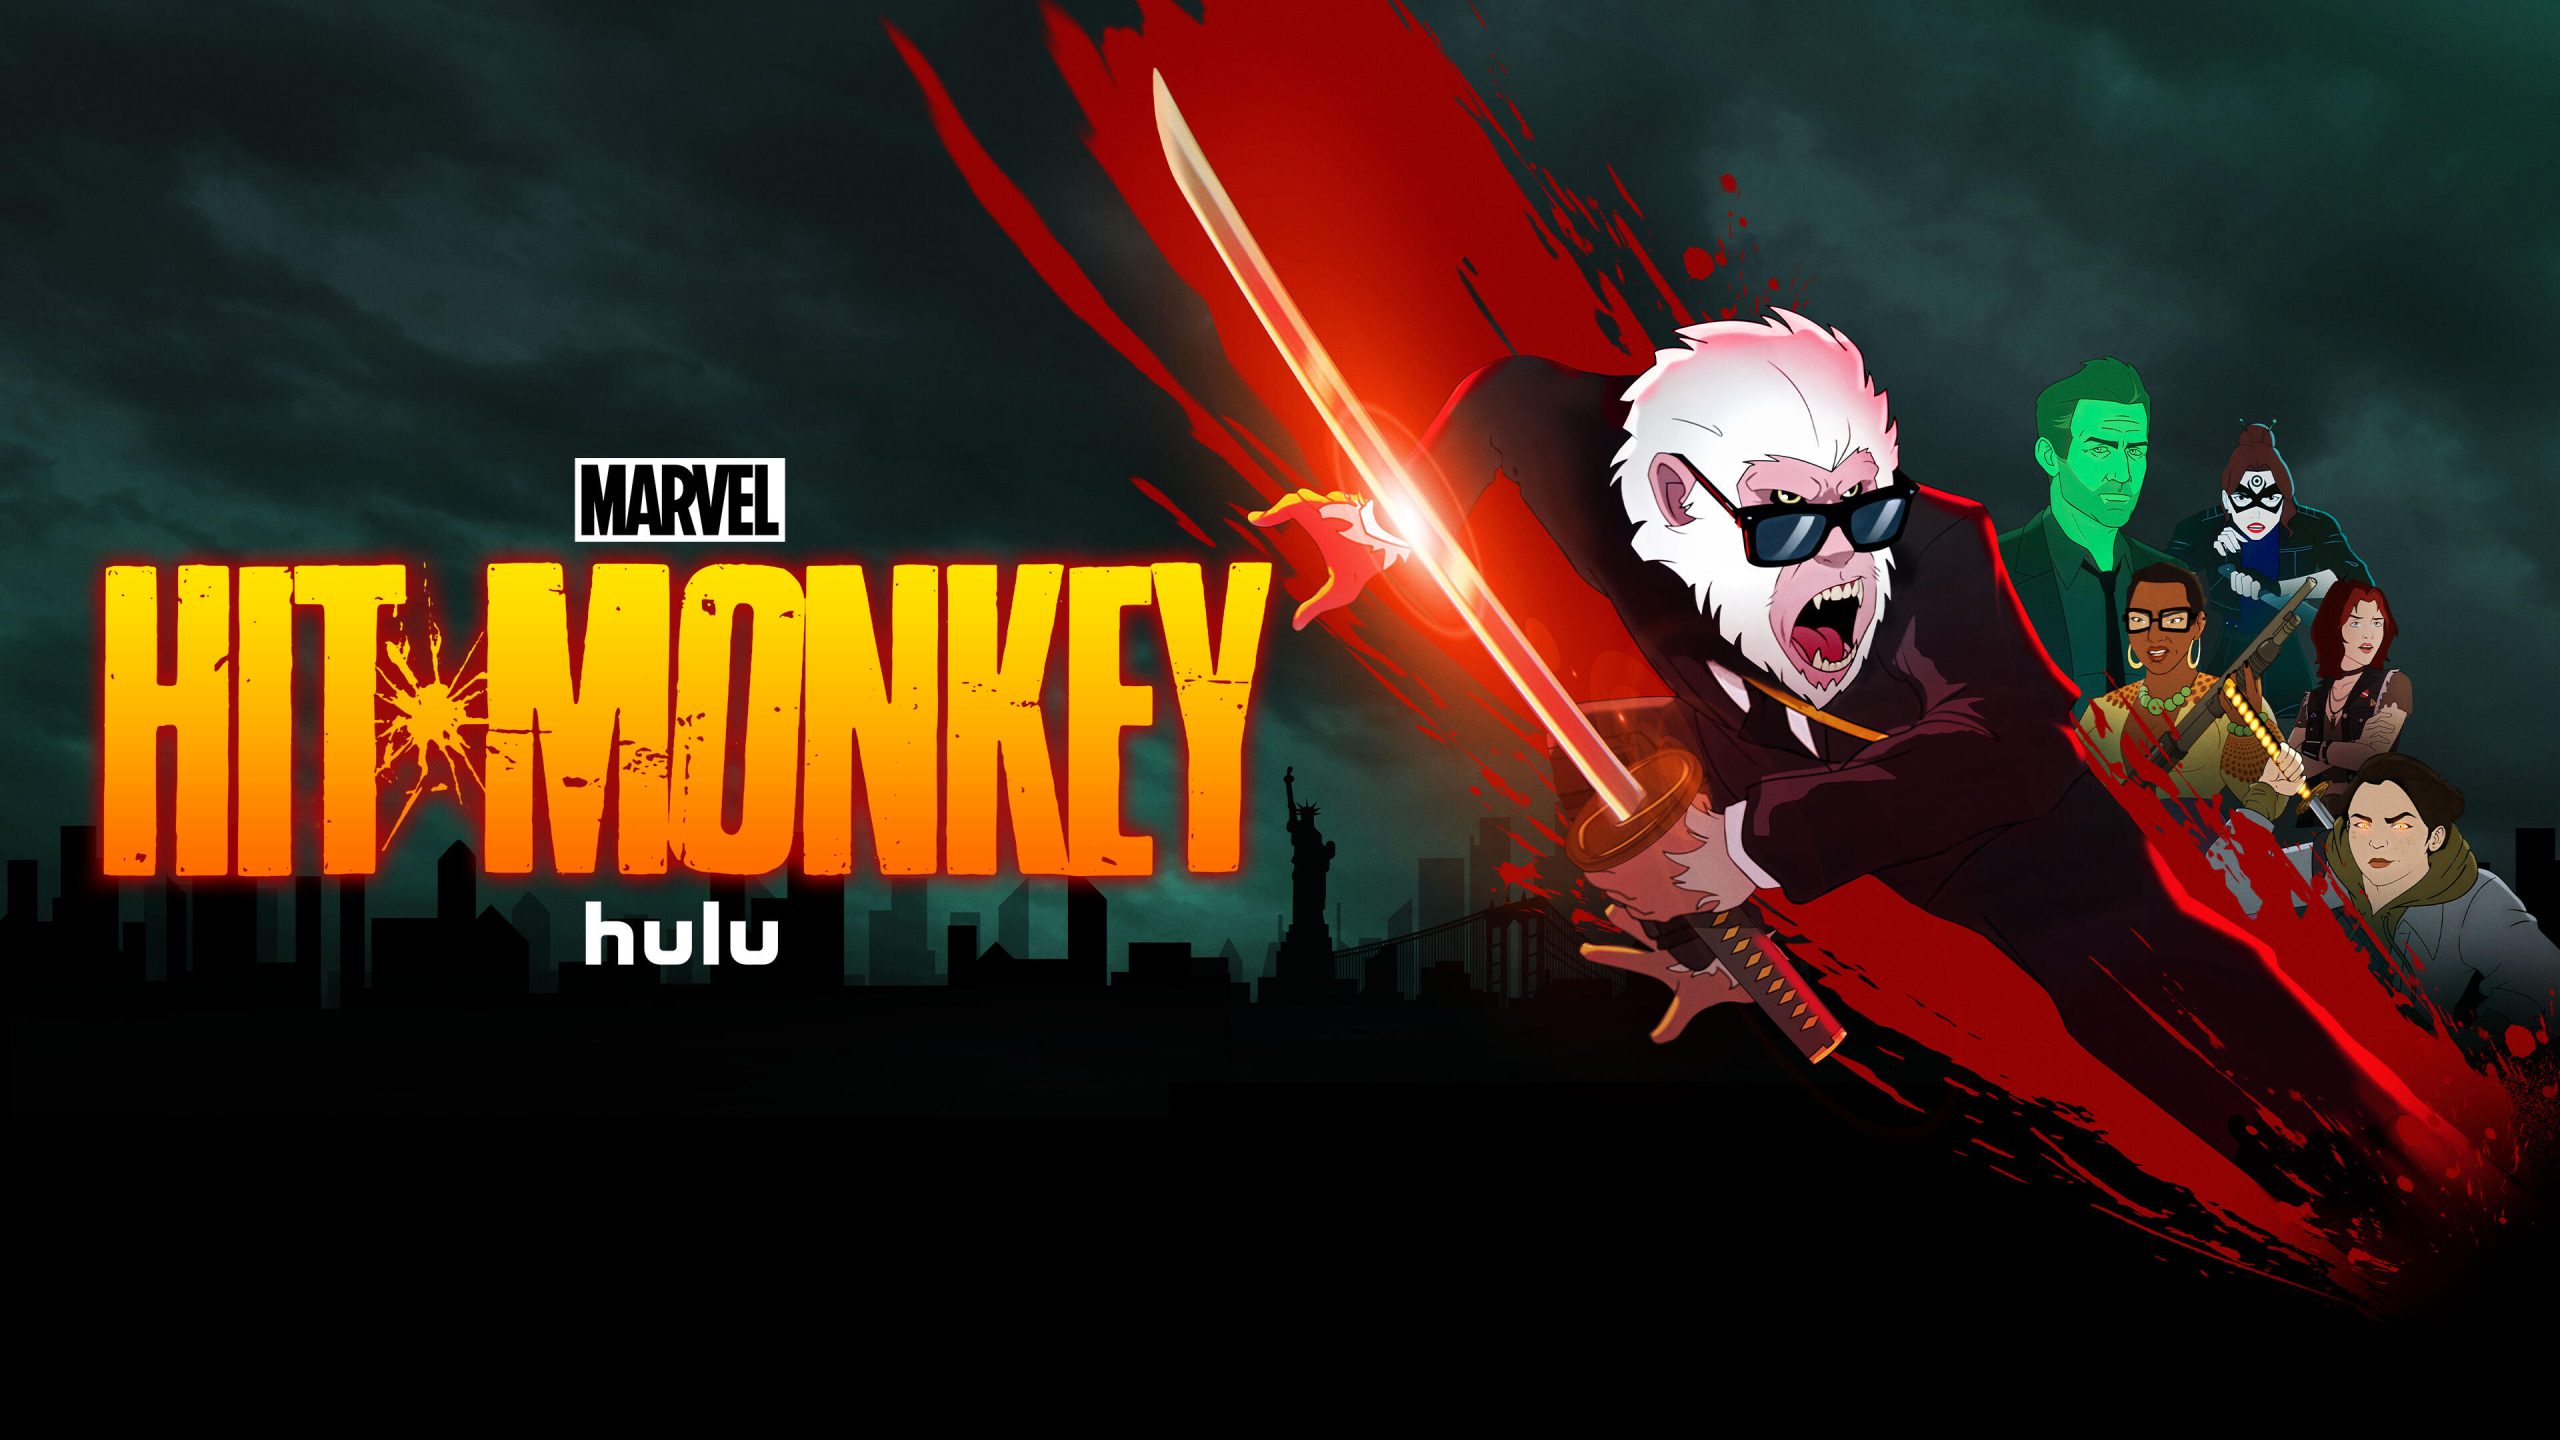 Marvel’s Hit-Monkey — Season 2 — In New York City, Monkey finds a path to escape his life of killing, while Bryce attempts to repair the damage to those he wronged in life. But what will it cost them to undo the past? (Courtesy of Marvel)